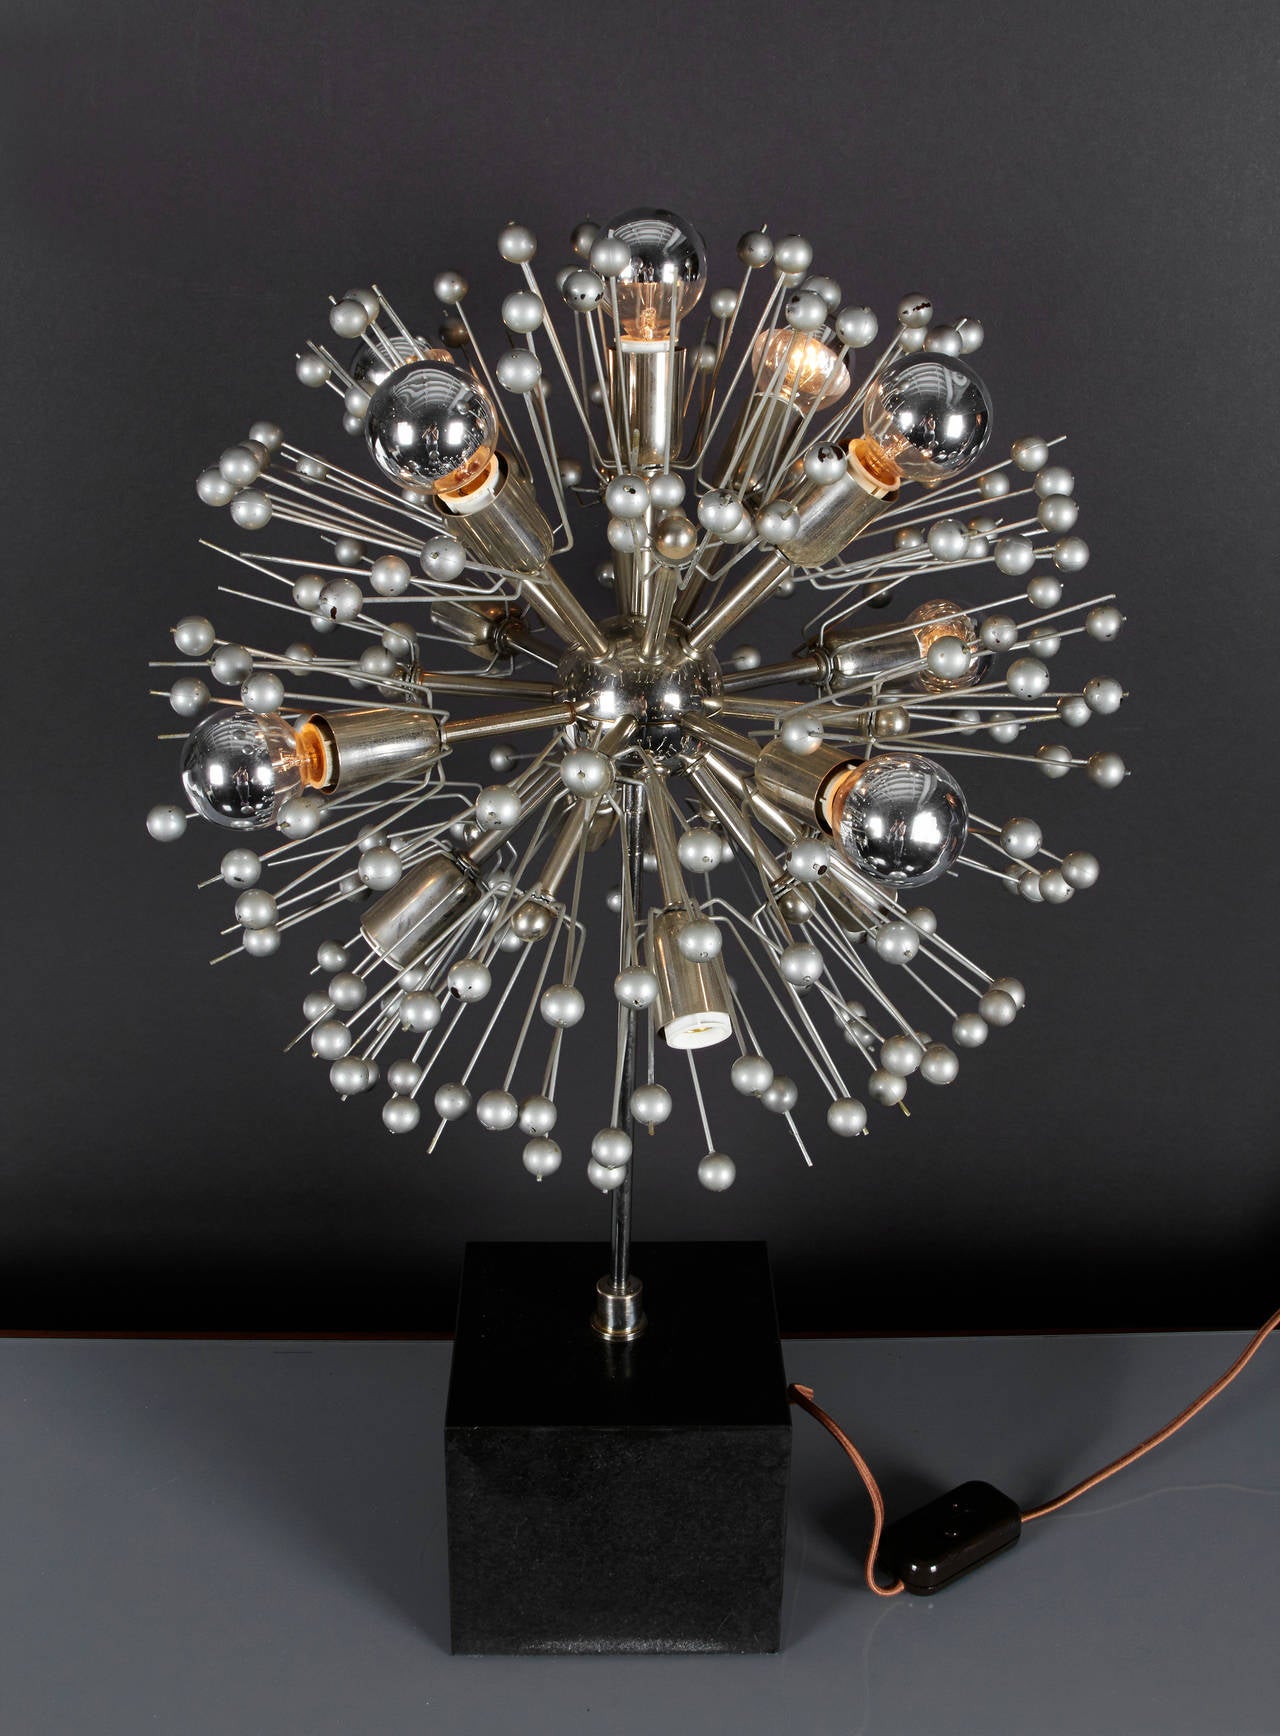 An Italian Sputnik table lamp with 16 lights mounted in to a solid balck marble base, the switch has a dimmer for ambient lighting.